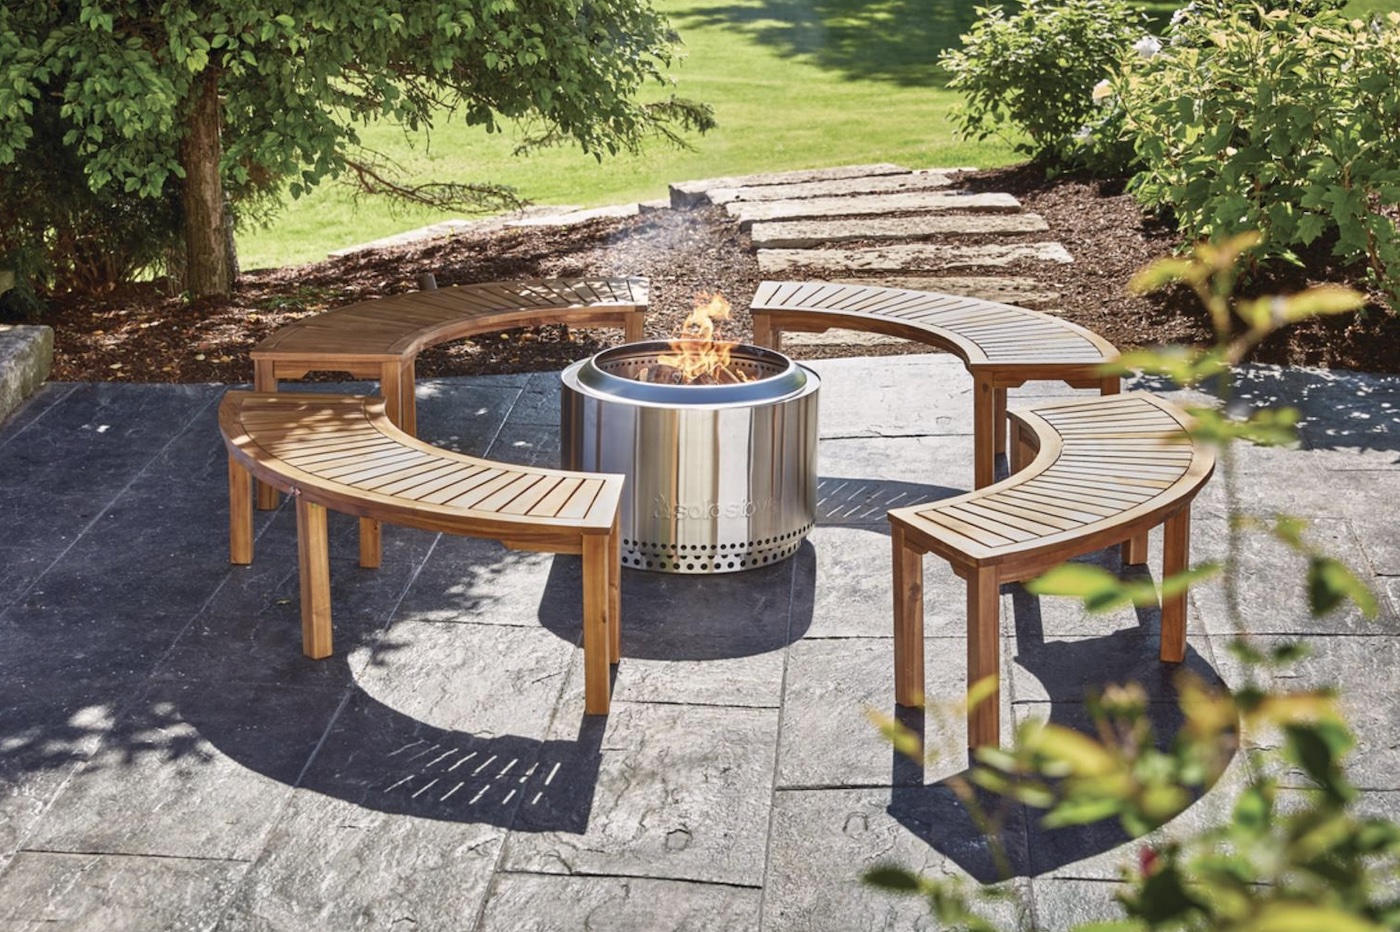 Curved garden benches surrounding an outdoor fire pit.